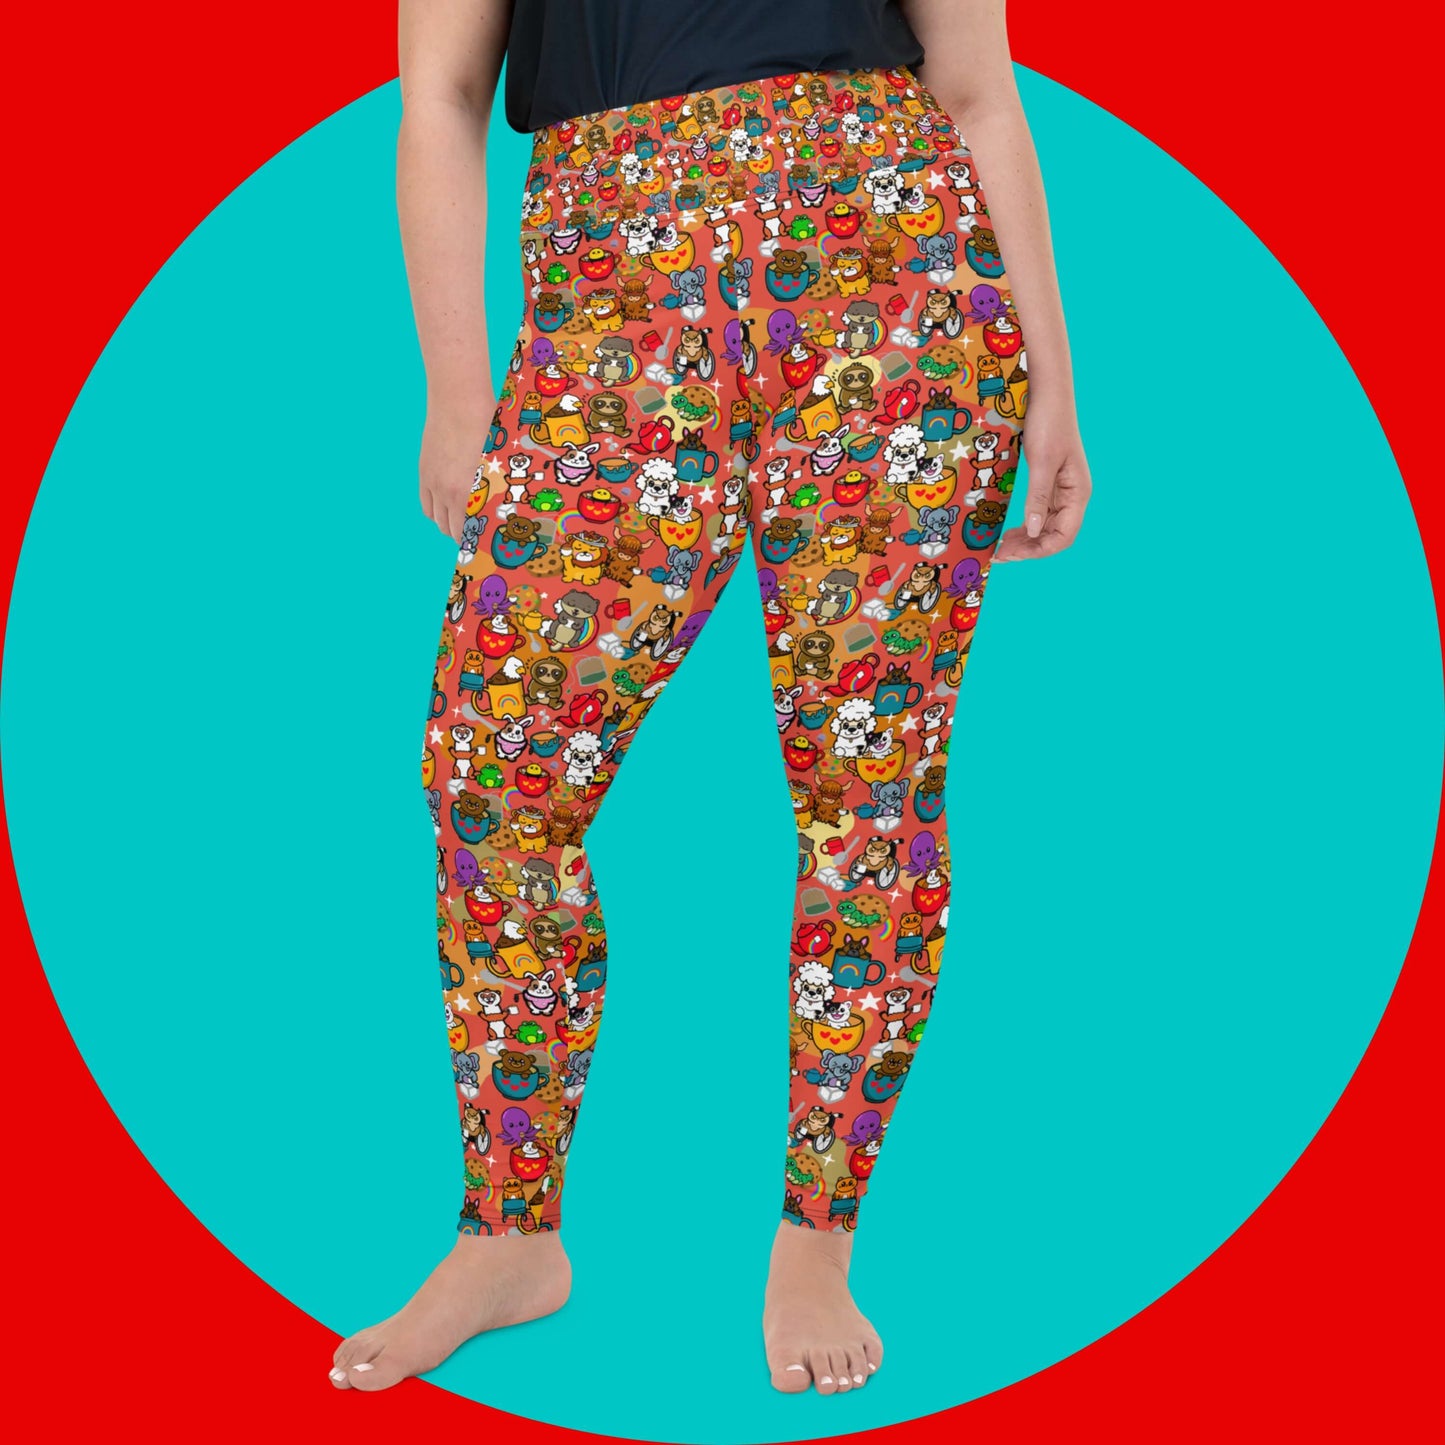 The Disabili Tea and Biscuits - Disability Plus Size Leggings being modelled by a femme person wearing a black tee on a red and blue background. The leggings feature various disabled and chronically ill animal characters drinking tea, sitting in tea mugs and holding up mugs. There is also various cookie biscuits, tea bags, sugar cubes, teapots, rainbows, sparkles and tea spills all underneath. The leggings are a punny gift raising awareness for disabilities.